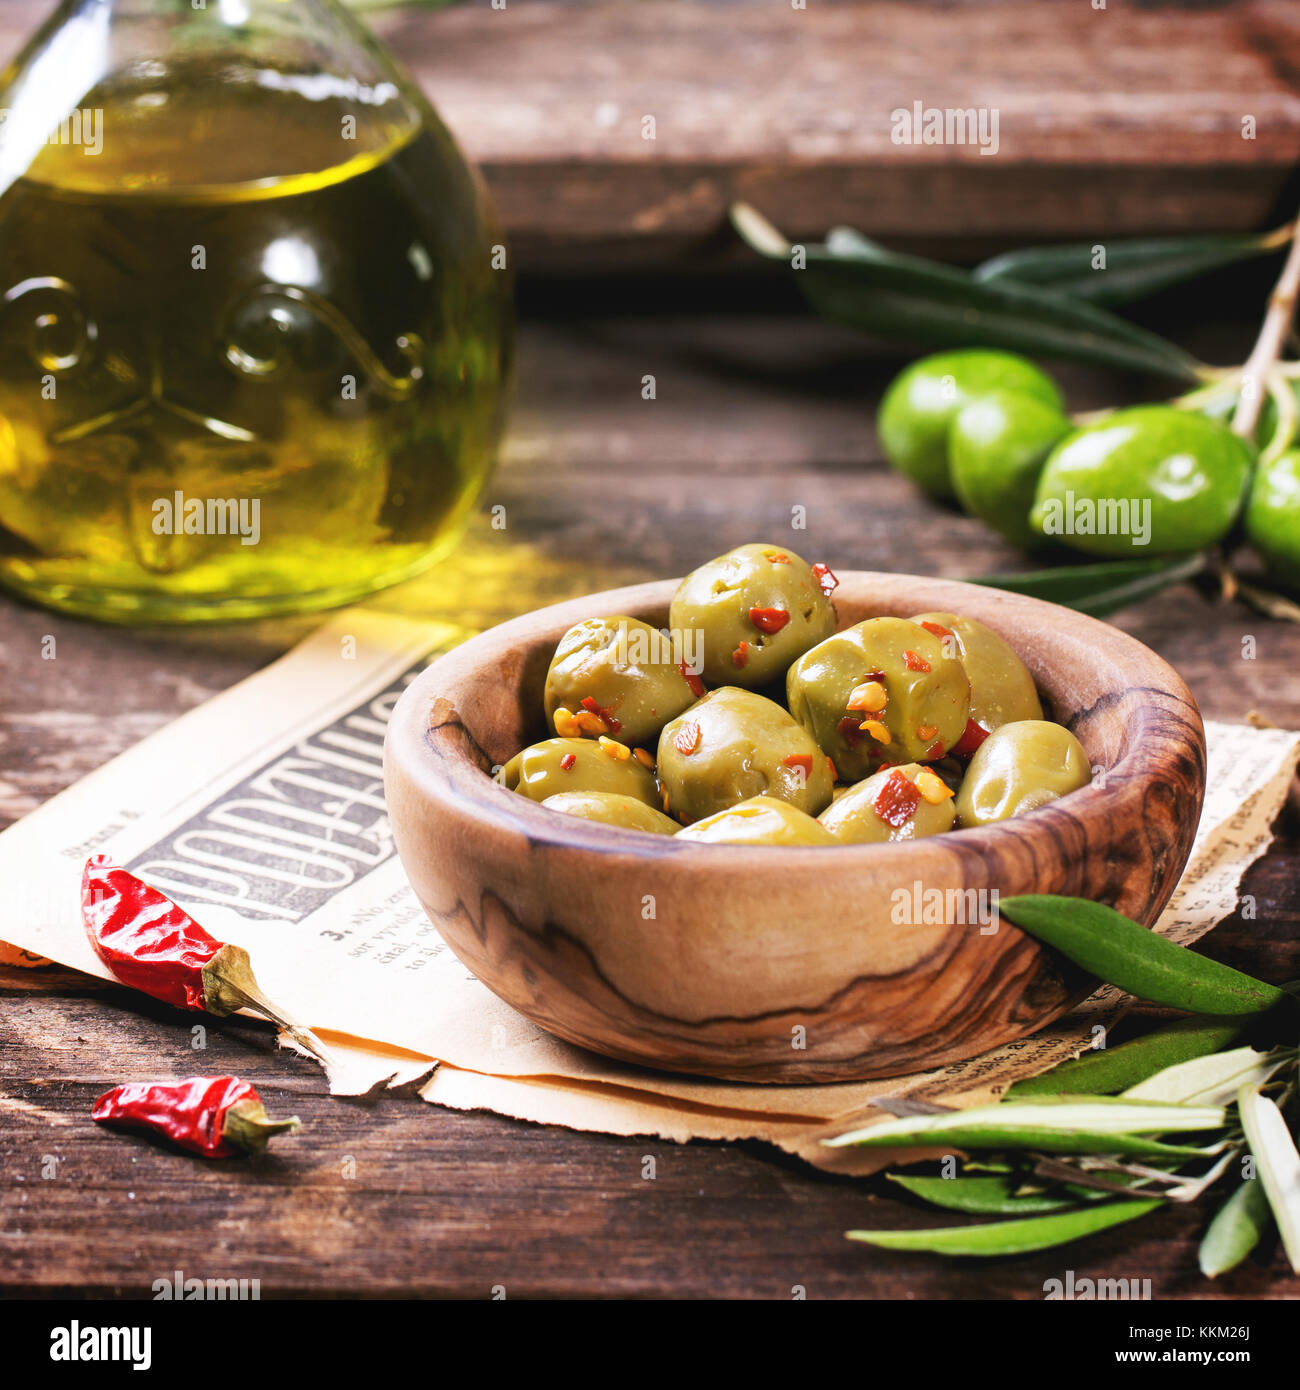 Green olives in olive wood bowl and bottle of olive oil served with chili peppers on old wooden table. Square image with selective focus Stock Photo